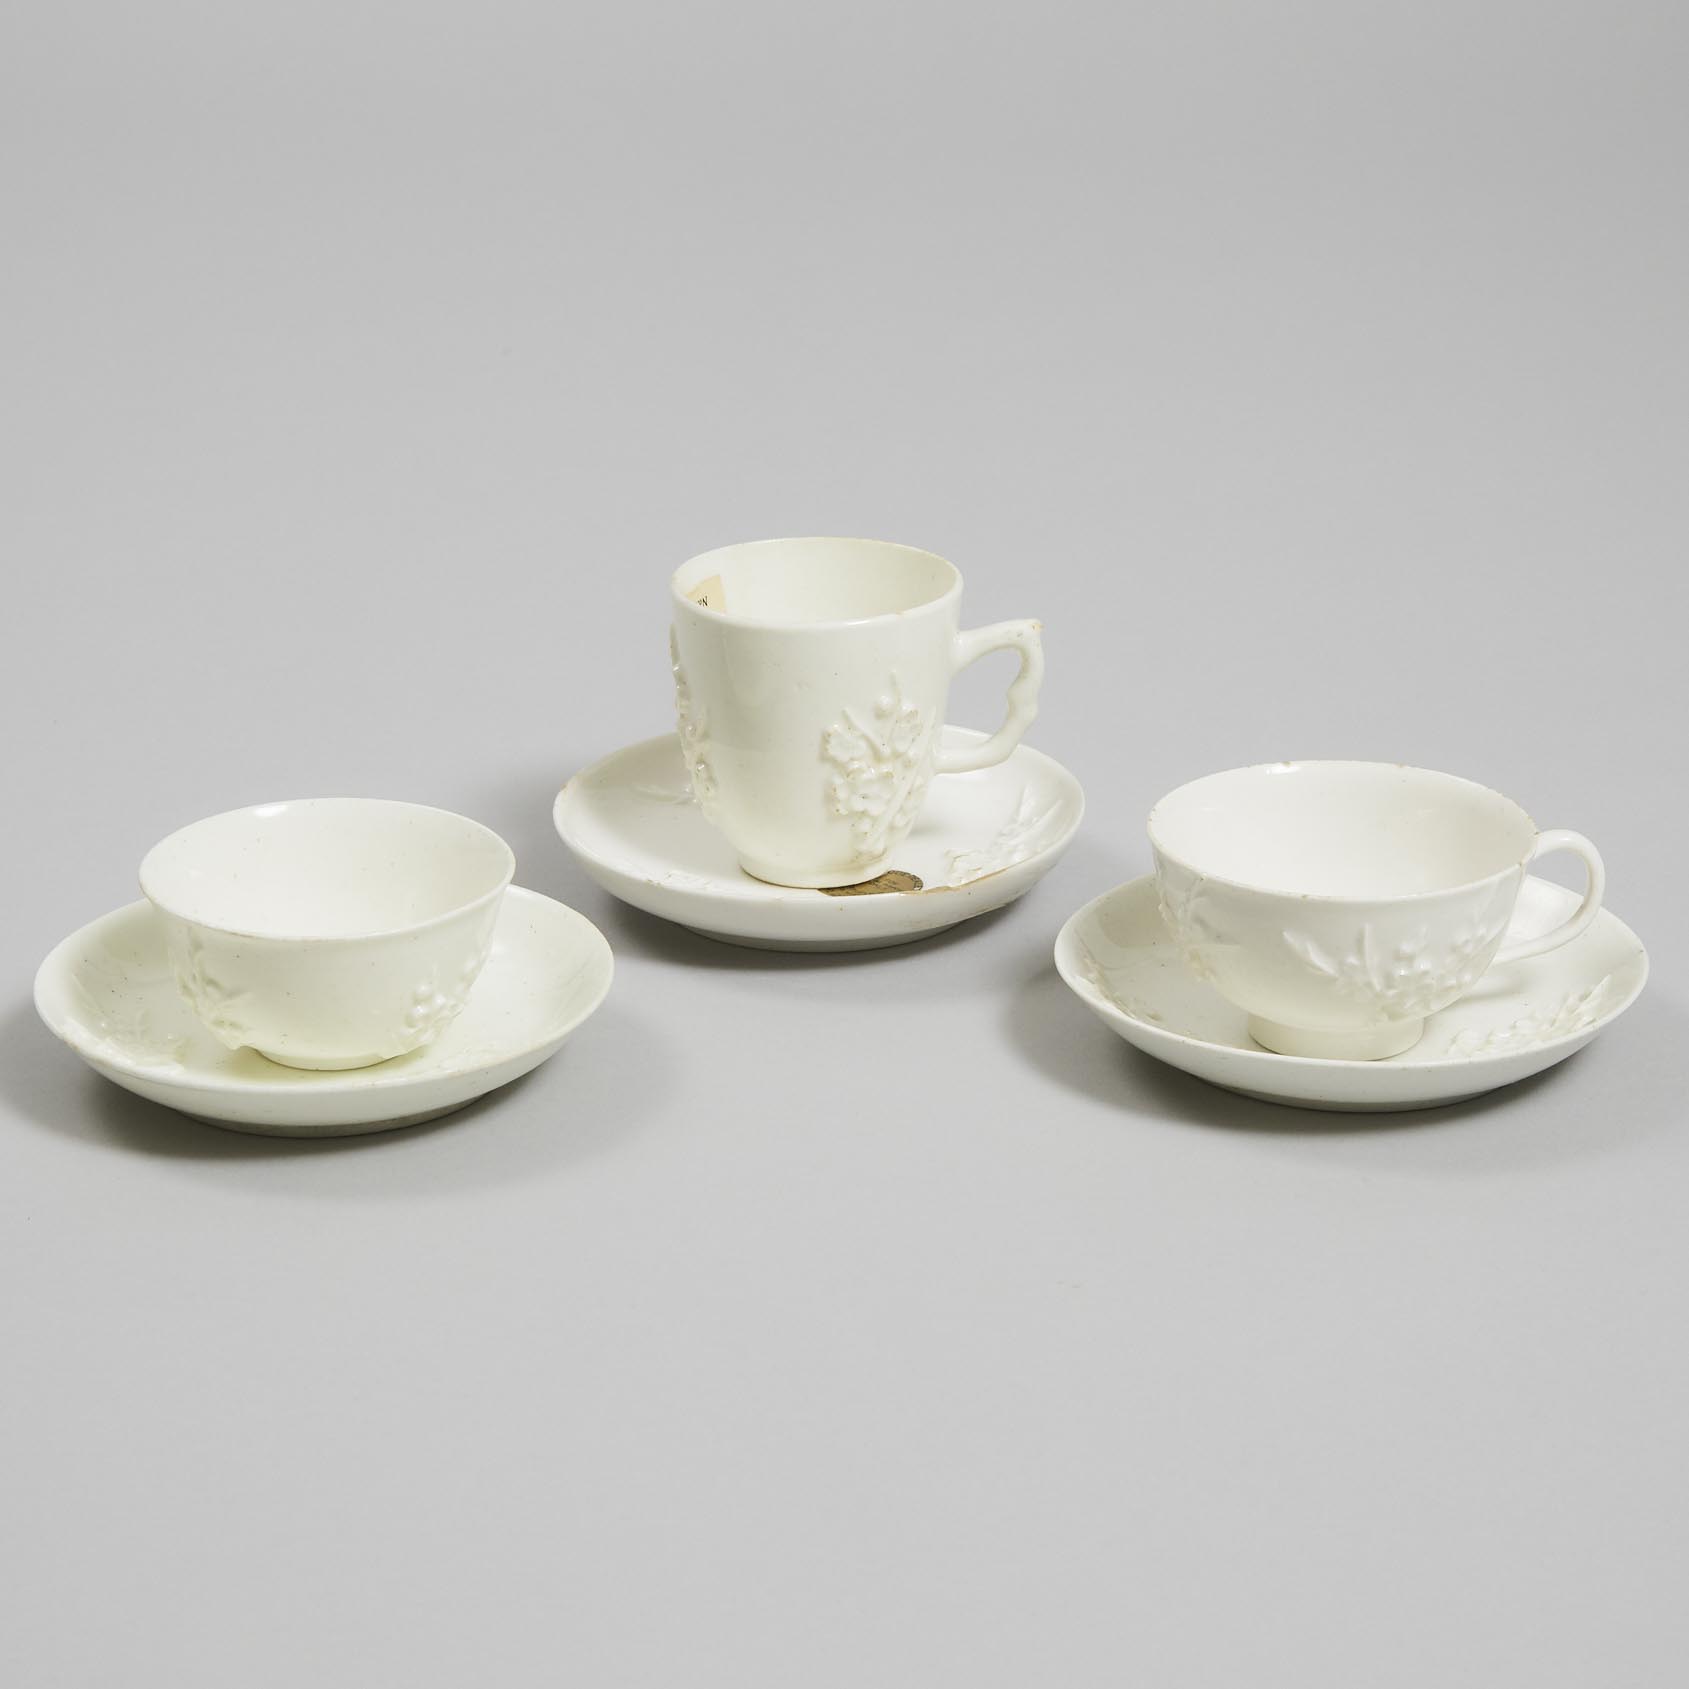 Two Bow Moulded and White Glazed Prunus Cups and a Tea Bowl and Three Saucers, c.1752-55